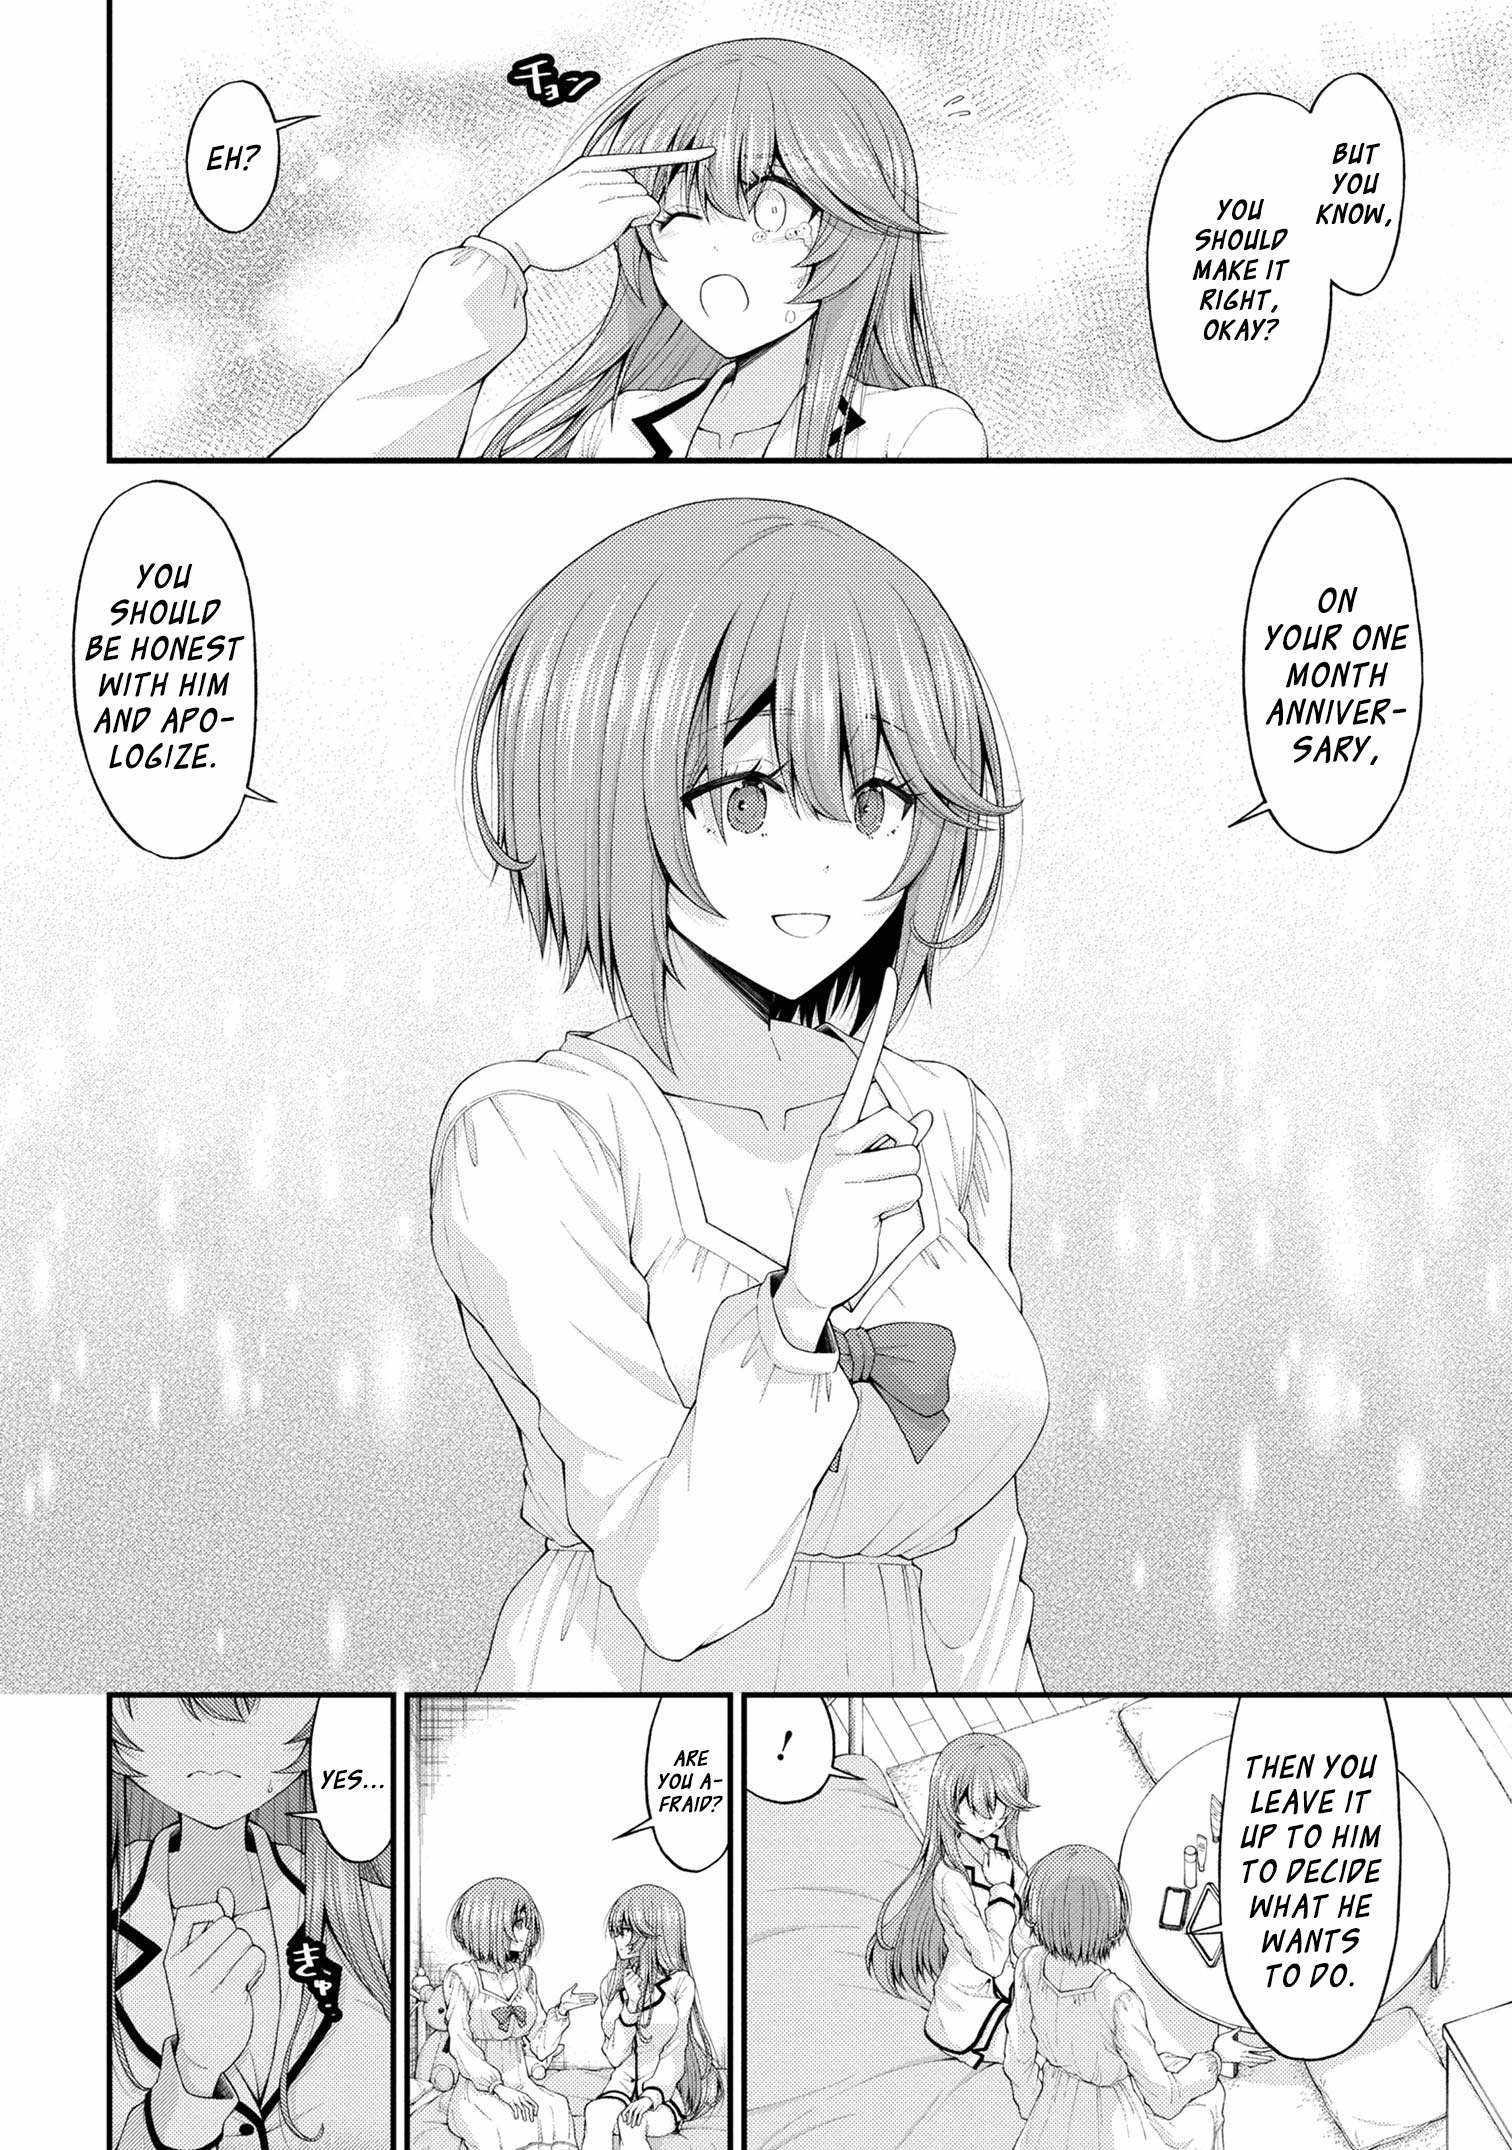 The Gal Who Was Meant to Confess to Me as a Game Punishment Has Apparently Fallen in Love with Me Chapter 12-5-eng-li - Page 21